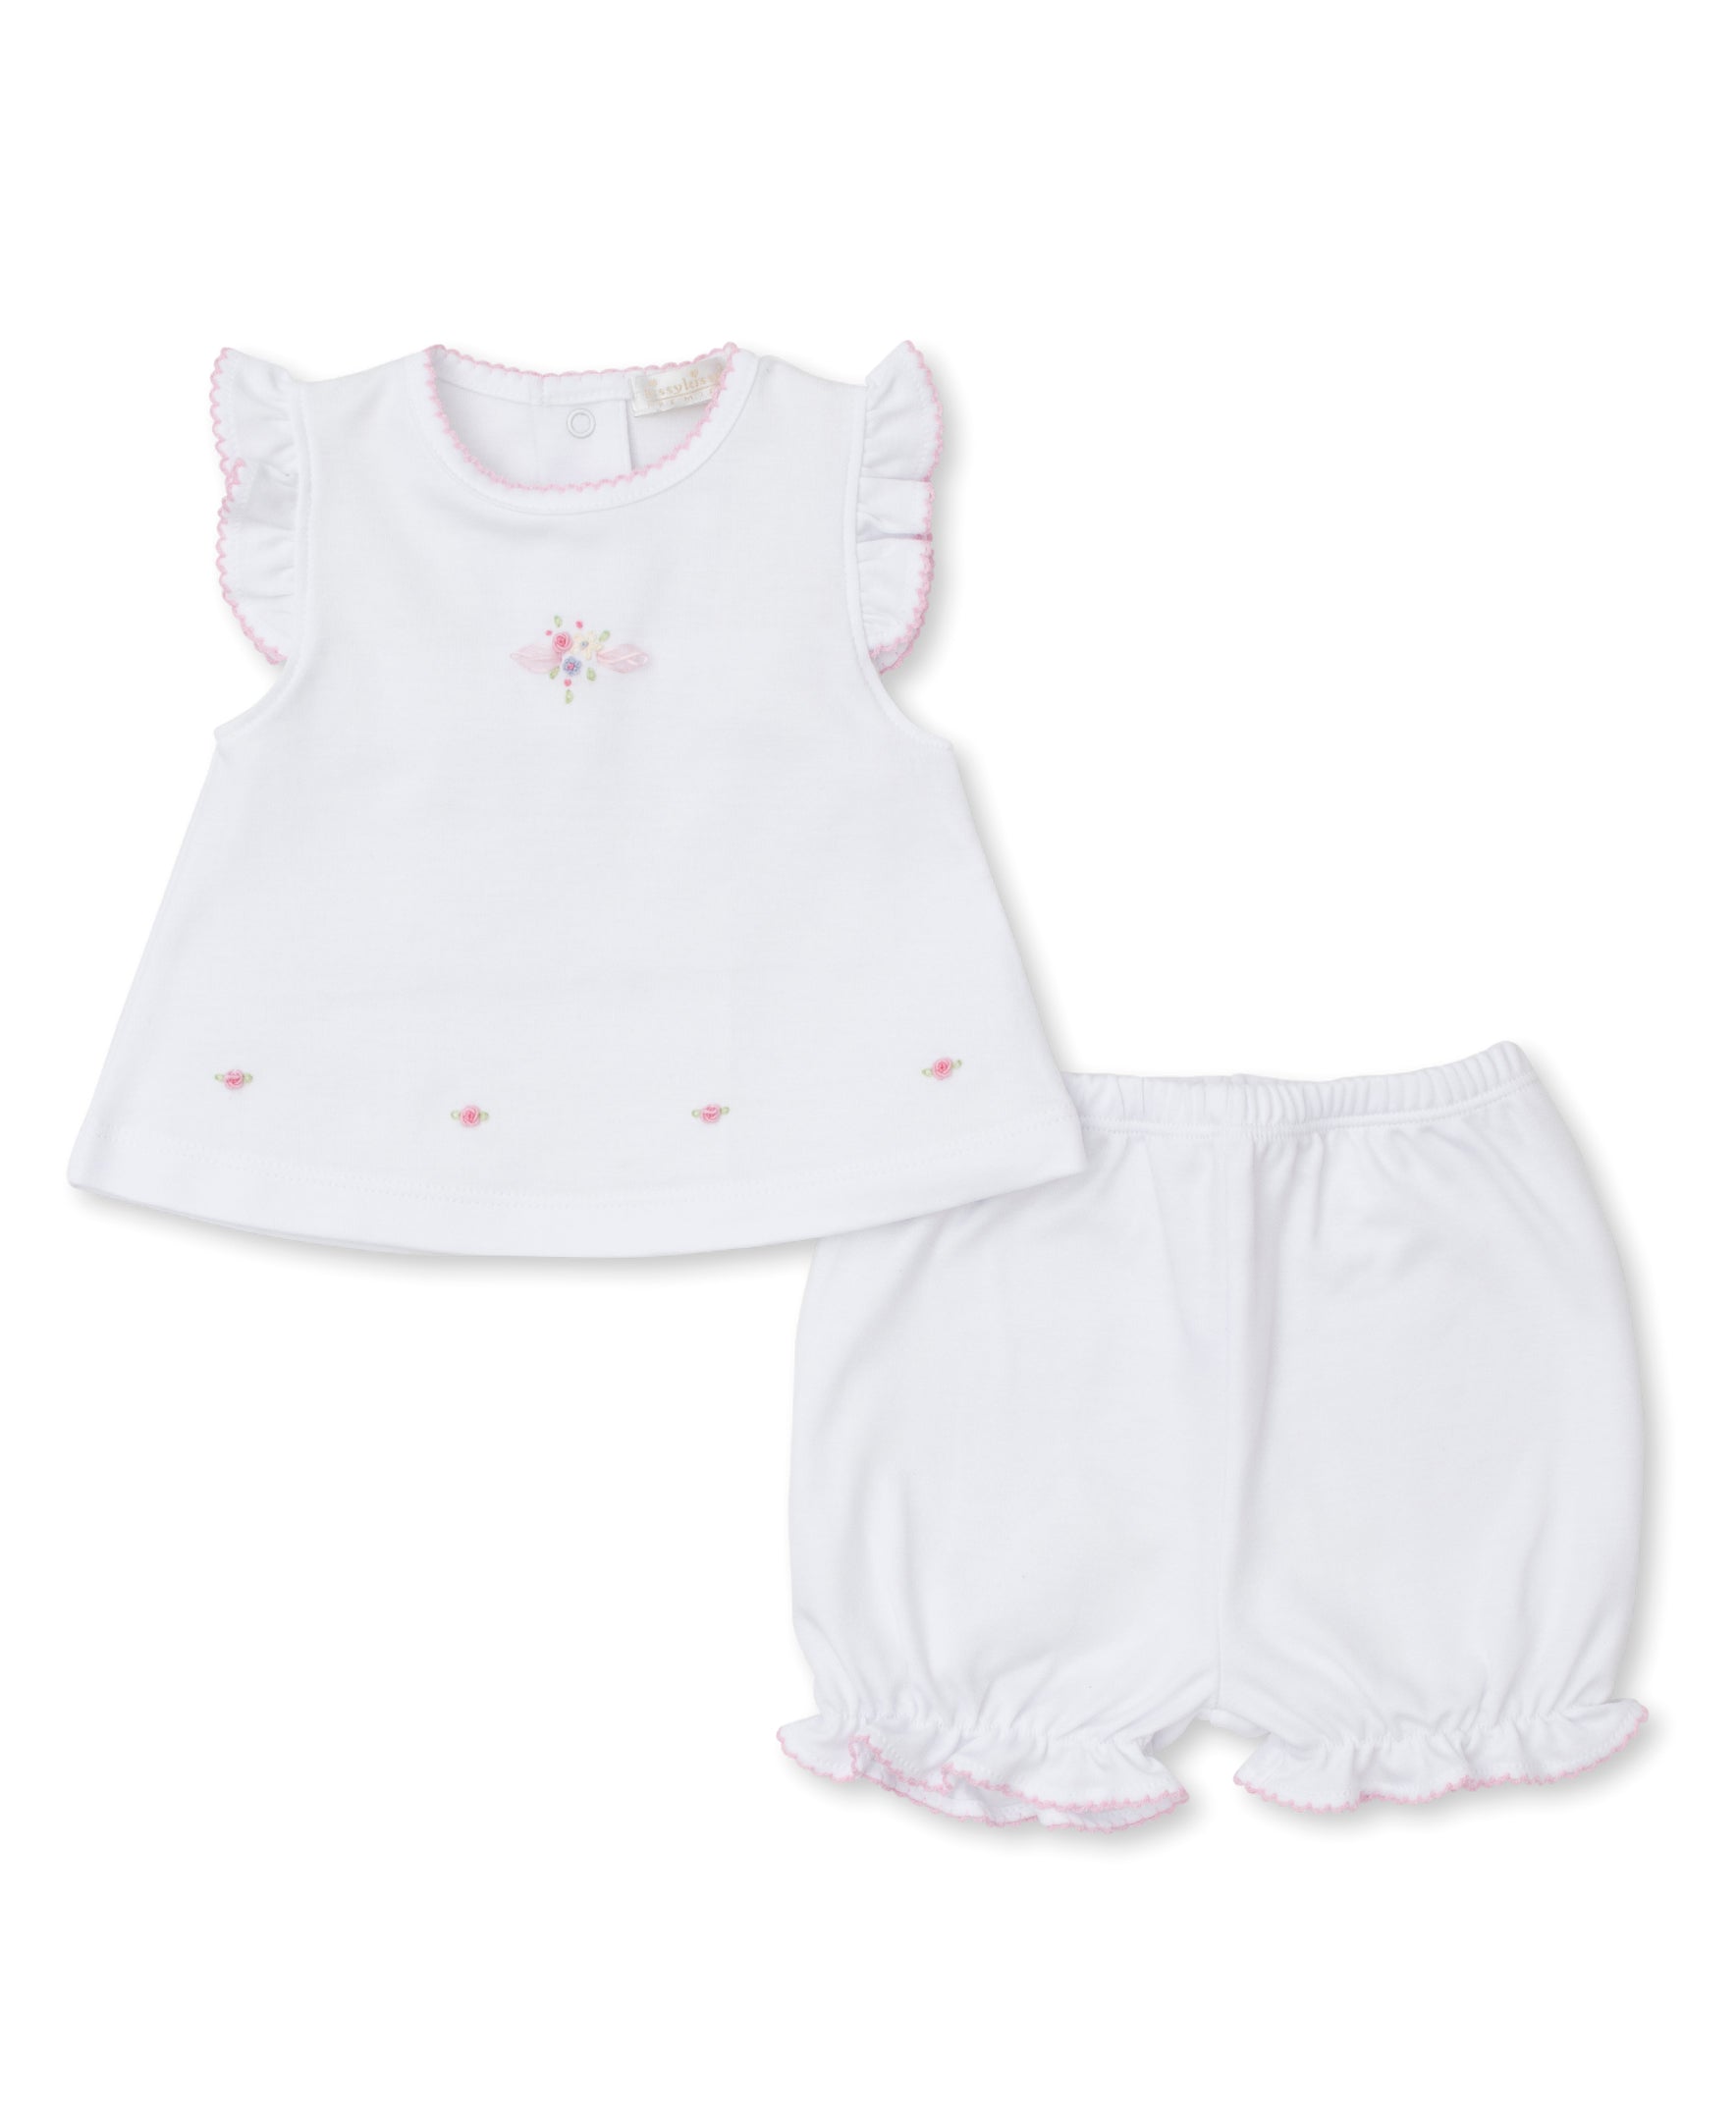 SCE Blooming Sprays White/Pink Hand Emb. Sunsuit Set - Kissy Kissy